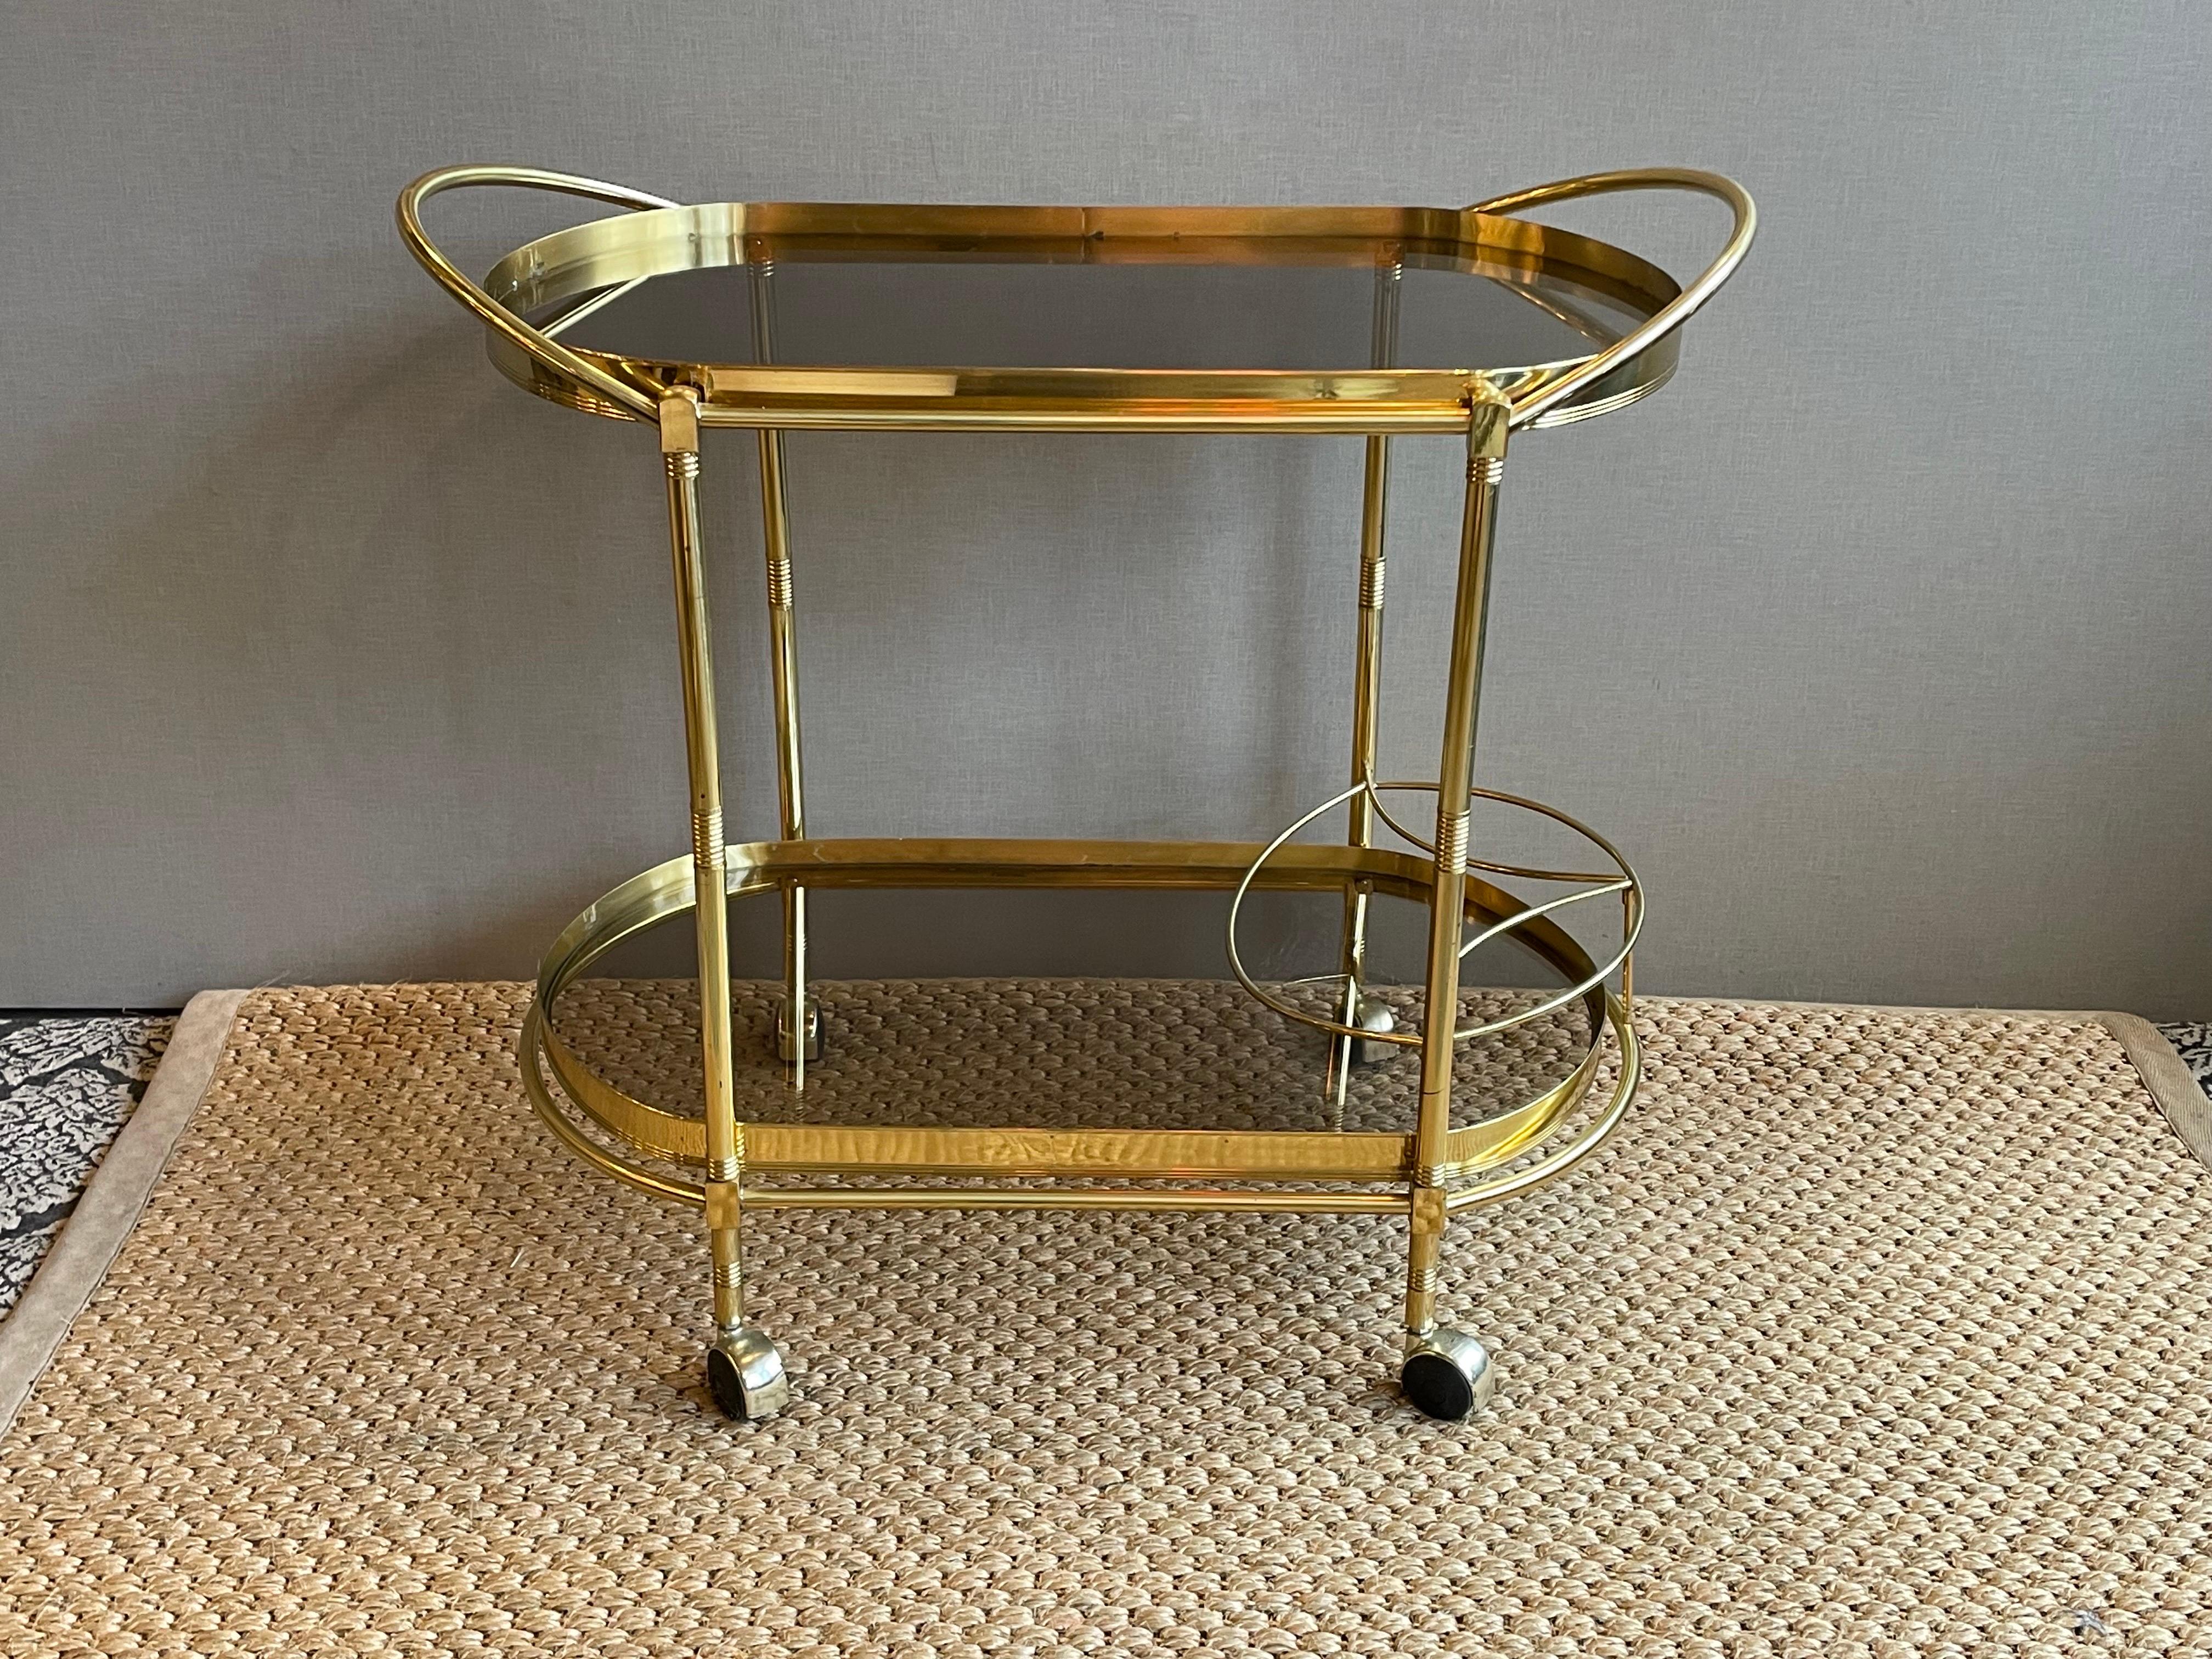 This is a wonderful sturdy vintage Brass and glass bar cart with two tiers and area to hold bottles 
It’s in wonderful vintage condition 